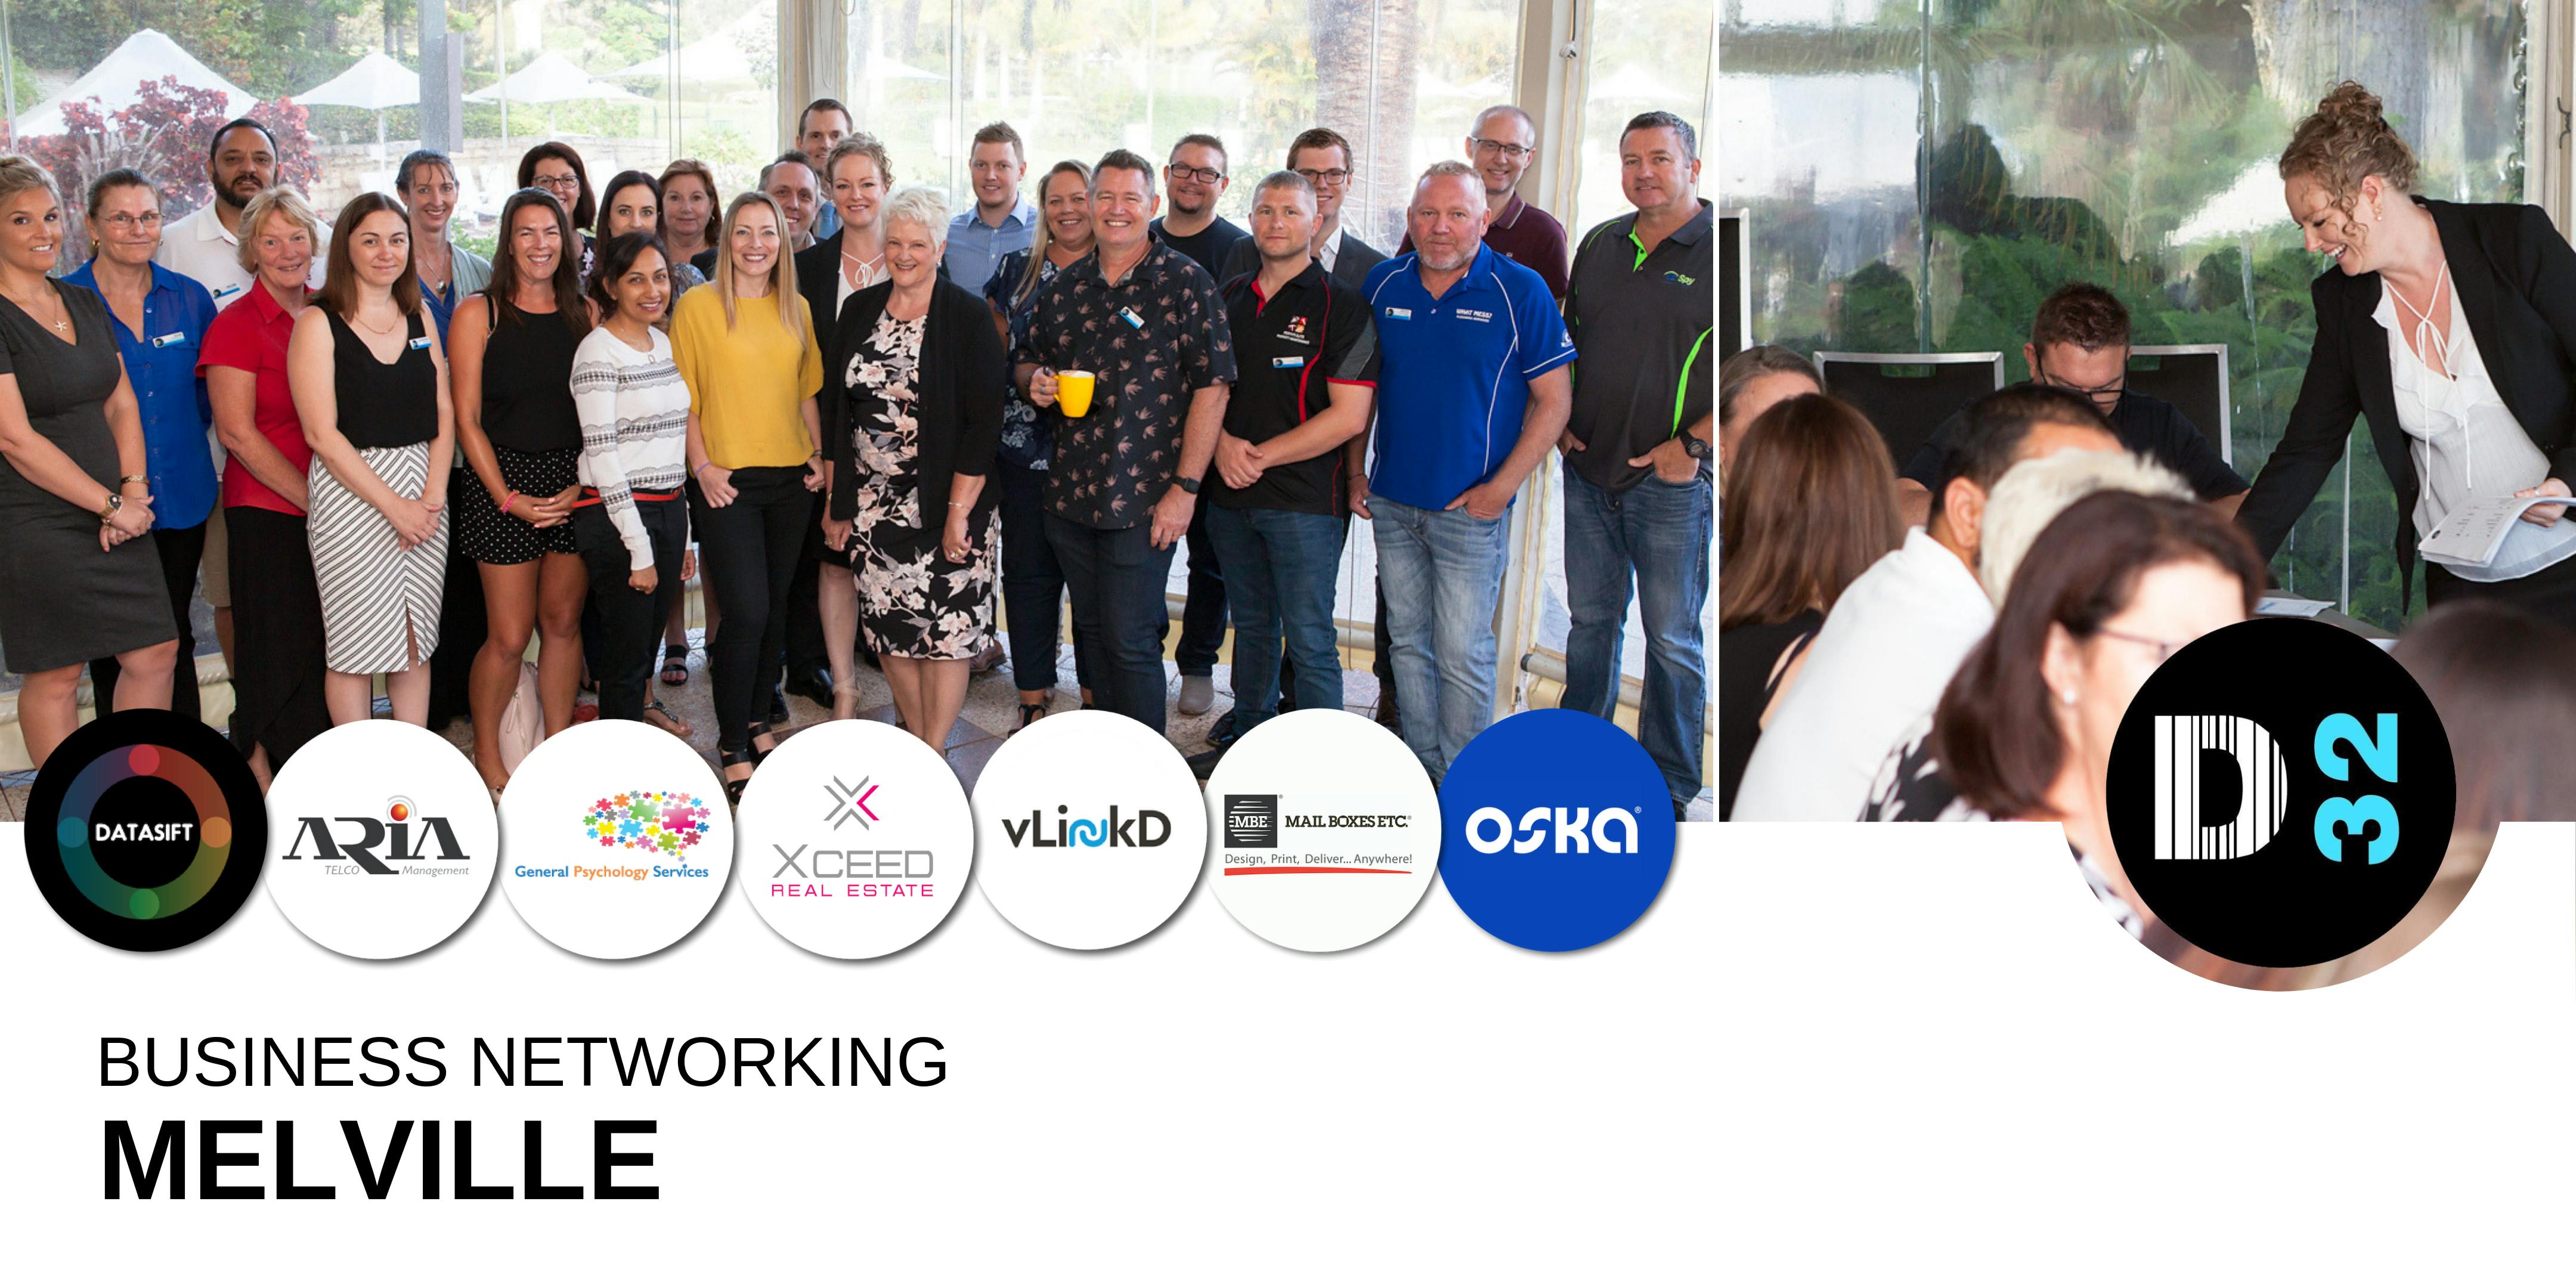 District32 Business Networking Perth– Melville / Mt Pleasant / Applecross Breakfast - Wed 17th July